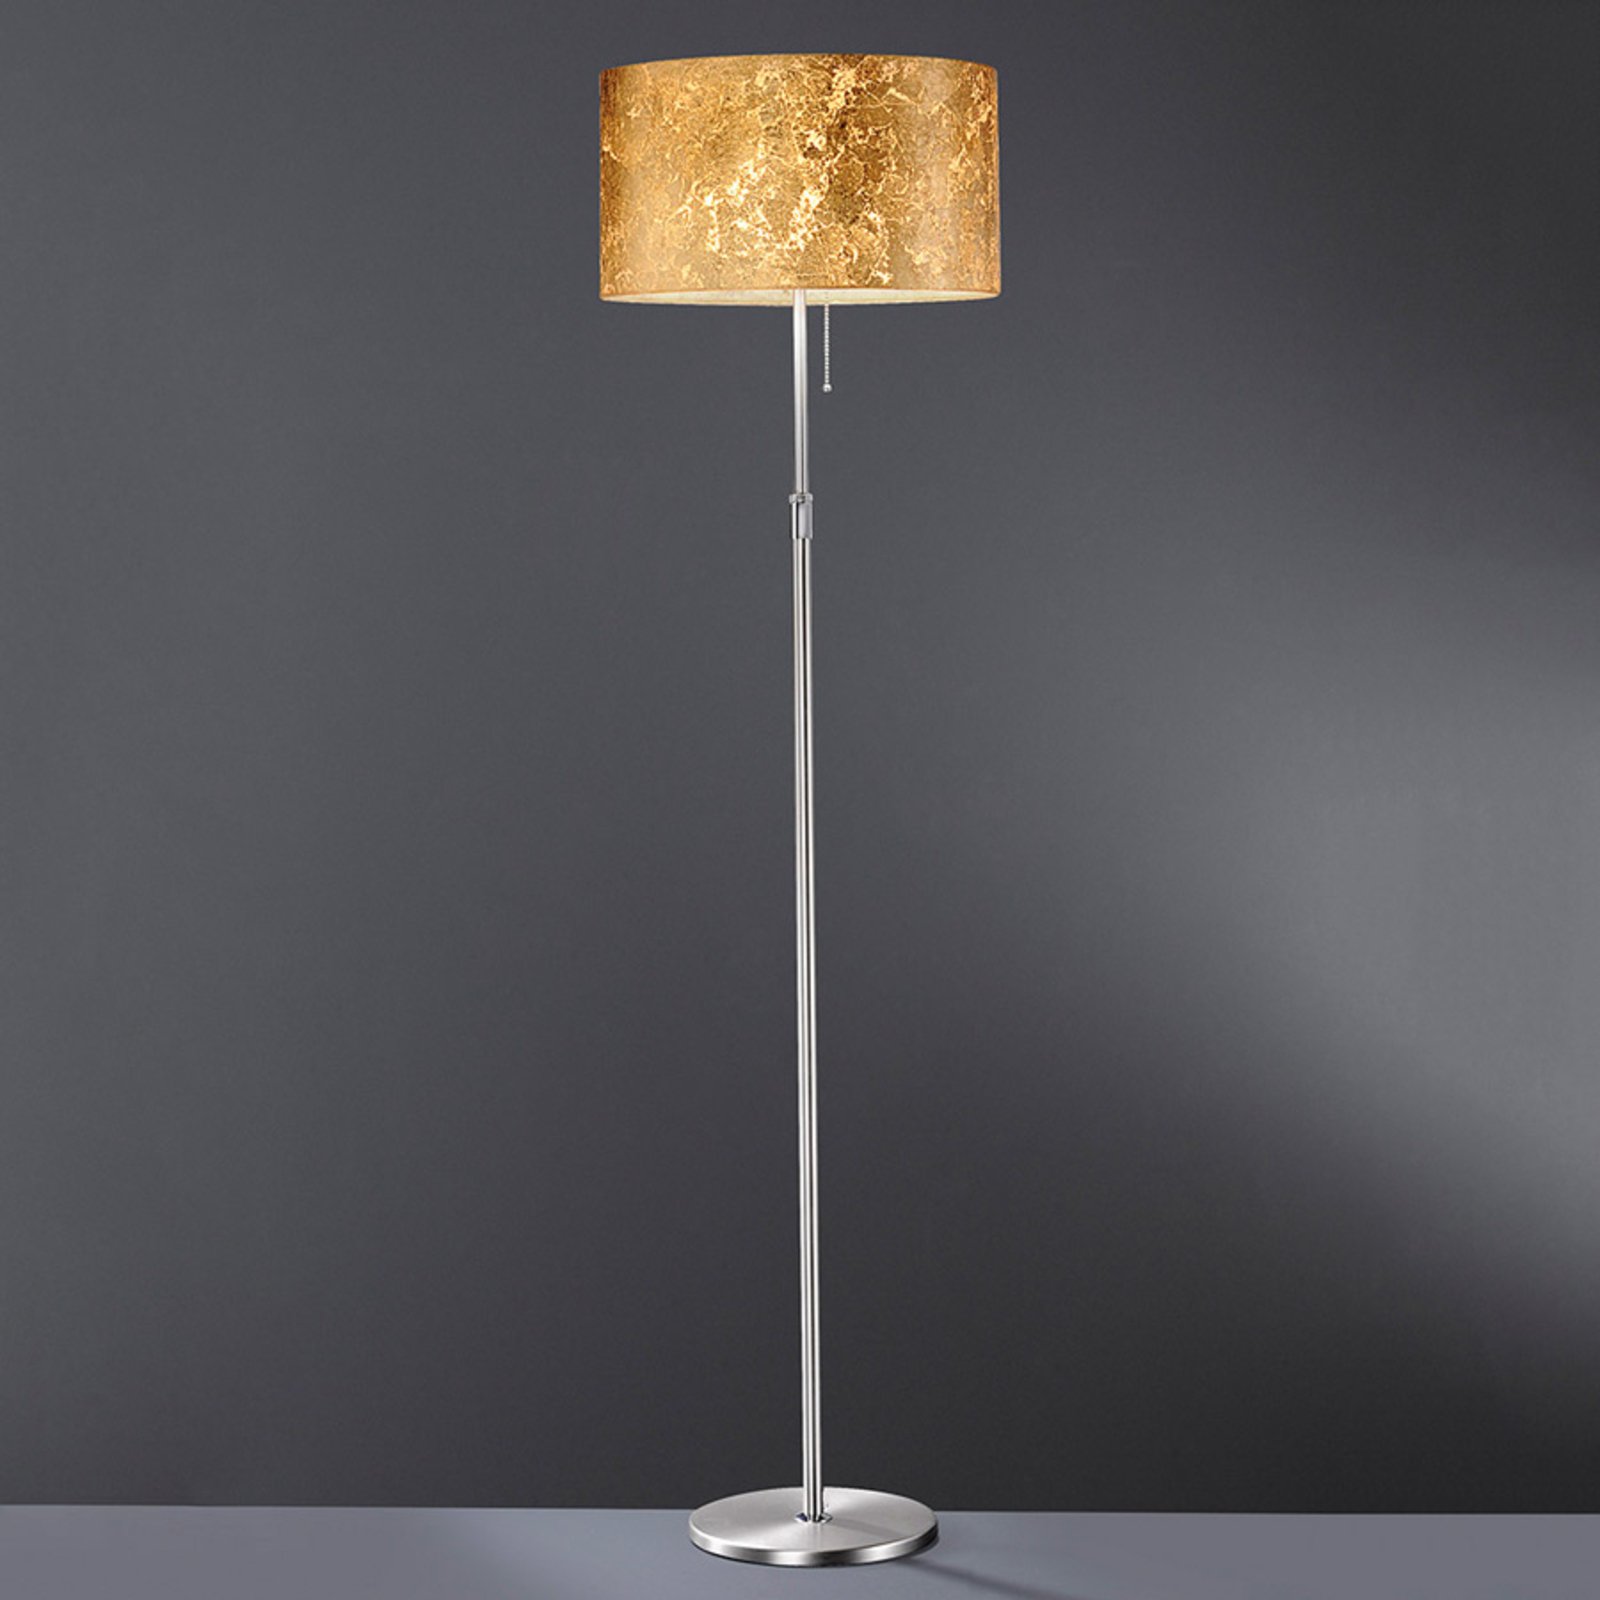 Alea Loop floor lamp with a gold leaf finish